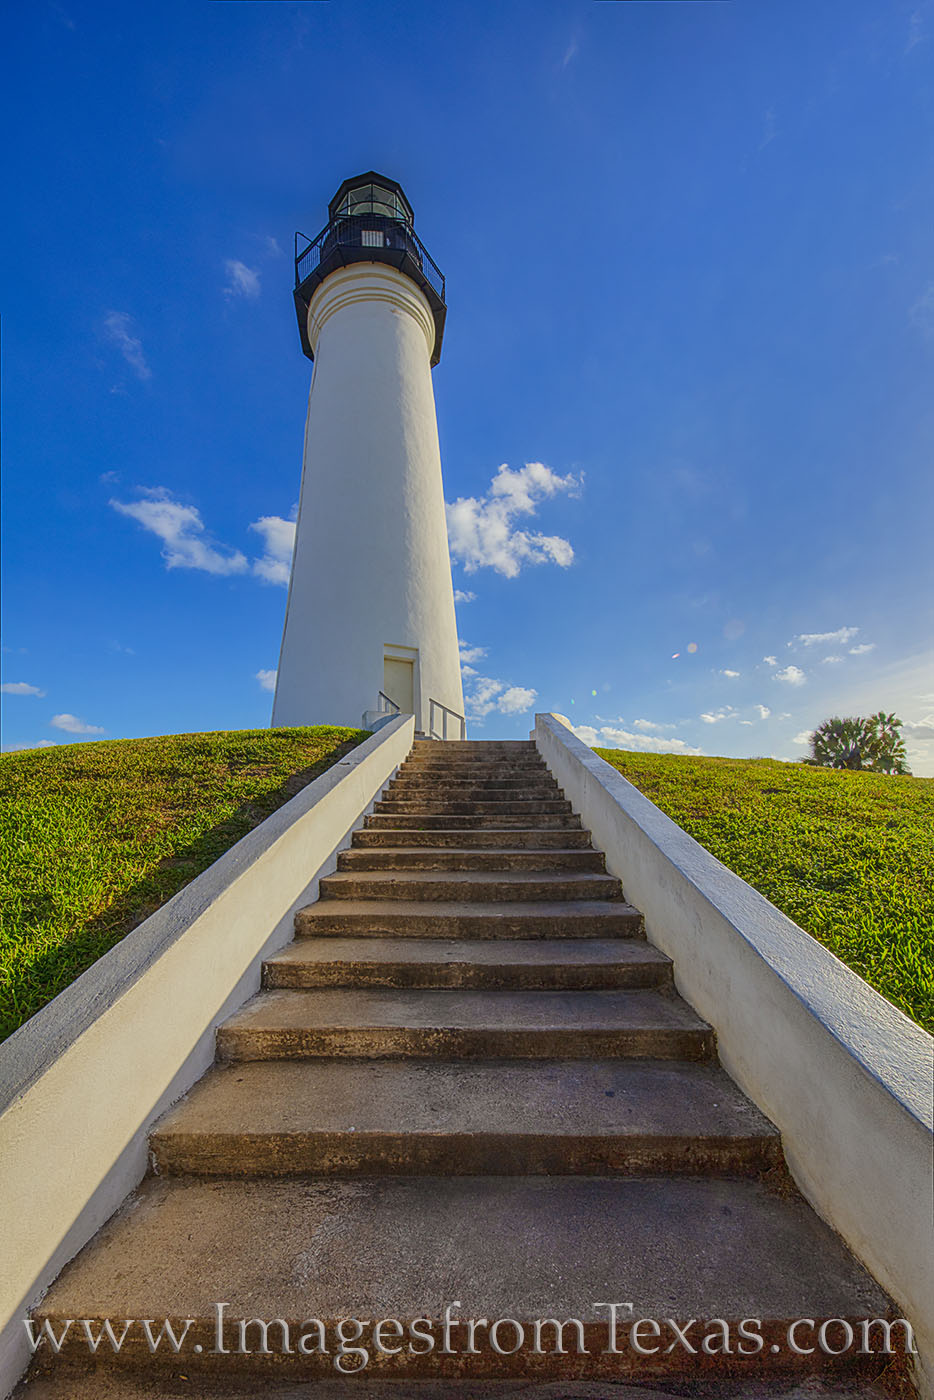 The Port Isabel Lightouse, located in Port Isabel, Texas, was built in 1852 to direct ships through the Brazos Santiago Pass...